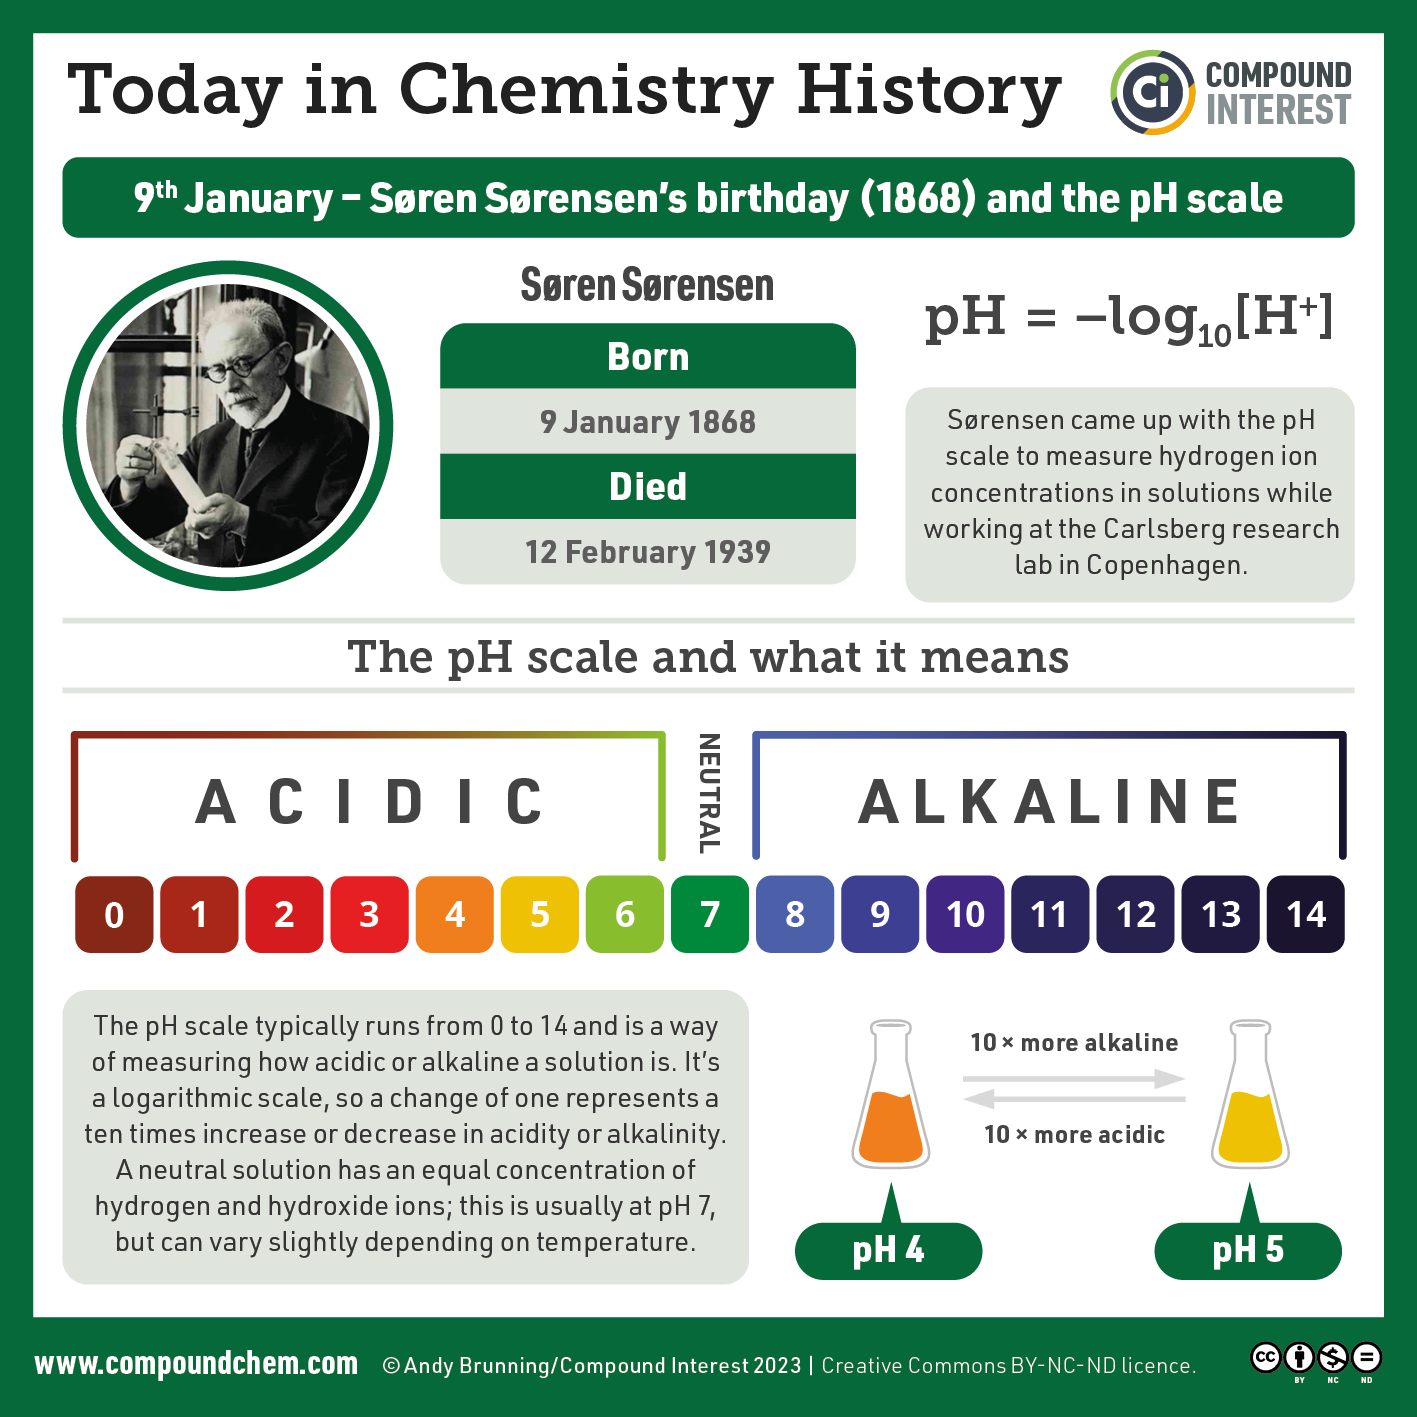 "Today in chemistry history" graphic for 9th January, marking Danish chemist Søren Sørensen's birthday in 1868 and his invention of the pH scale. Sørensen came up with the pH scale to measure hydrogen ion concentrations in solutions while working at the Carlsberg research lab in Copenhagen. The pH scale runs from 0 to 14 and is a way of measuring how acidic or alkaline a solution is. It’s a logarithmic scale, so a change of one represents a ten times increase or decrease in acidity or alkalinity. A neutral solution has an equal concentration of hydrogen and hydroxide ions; this is usually at pH 7, but can vary slightly depending on temperature.